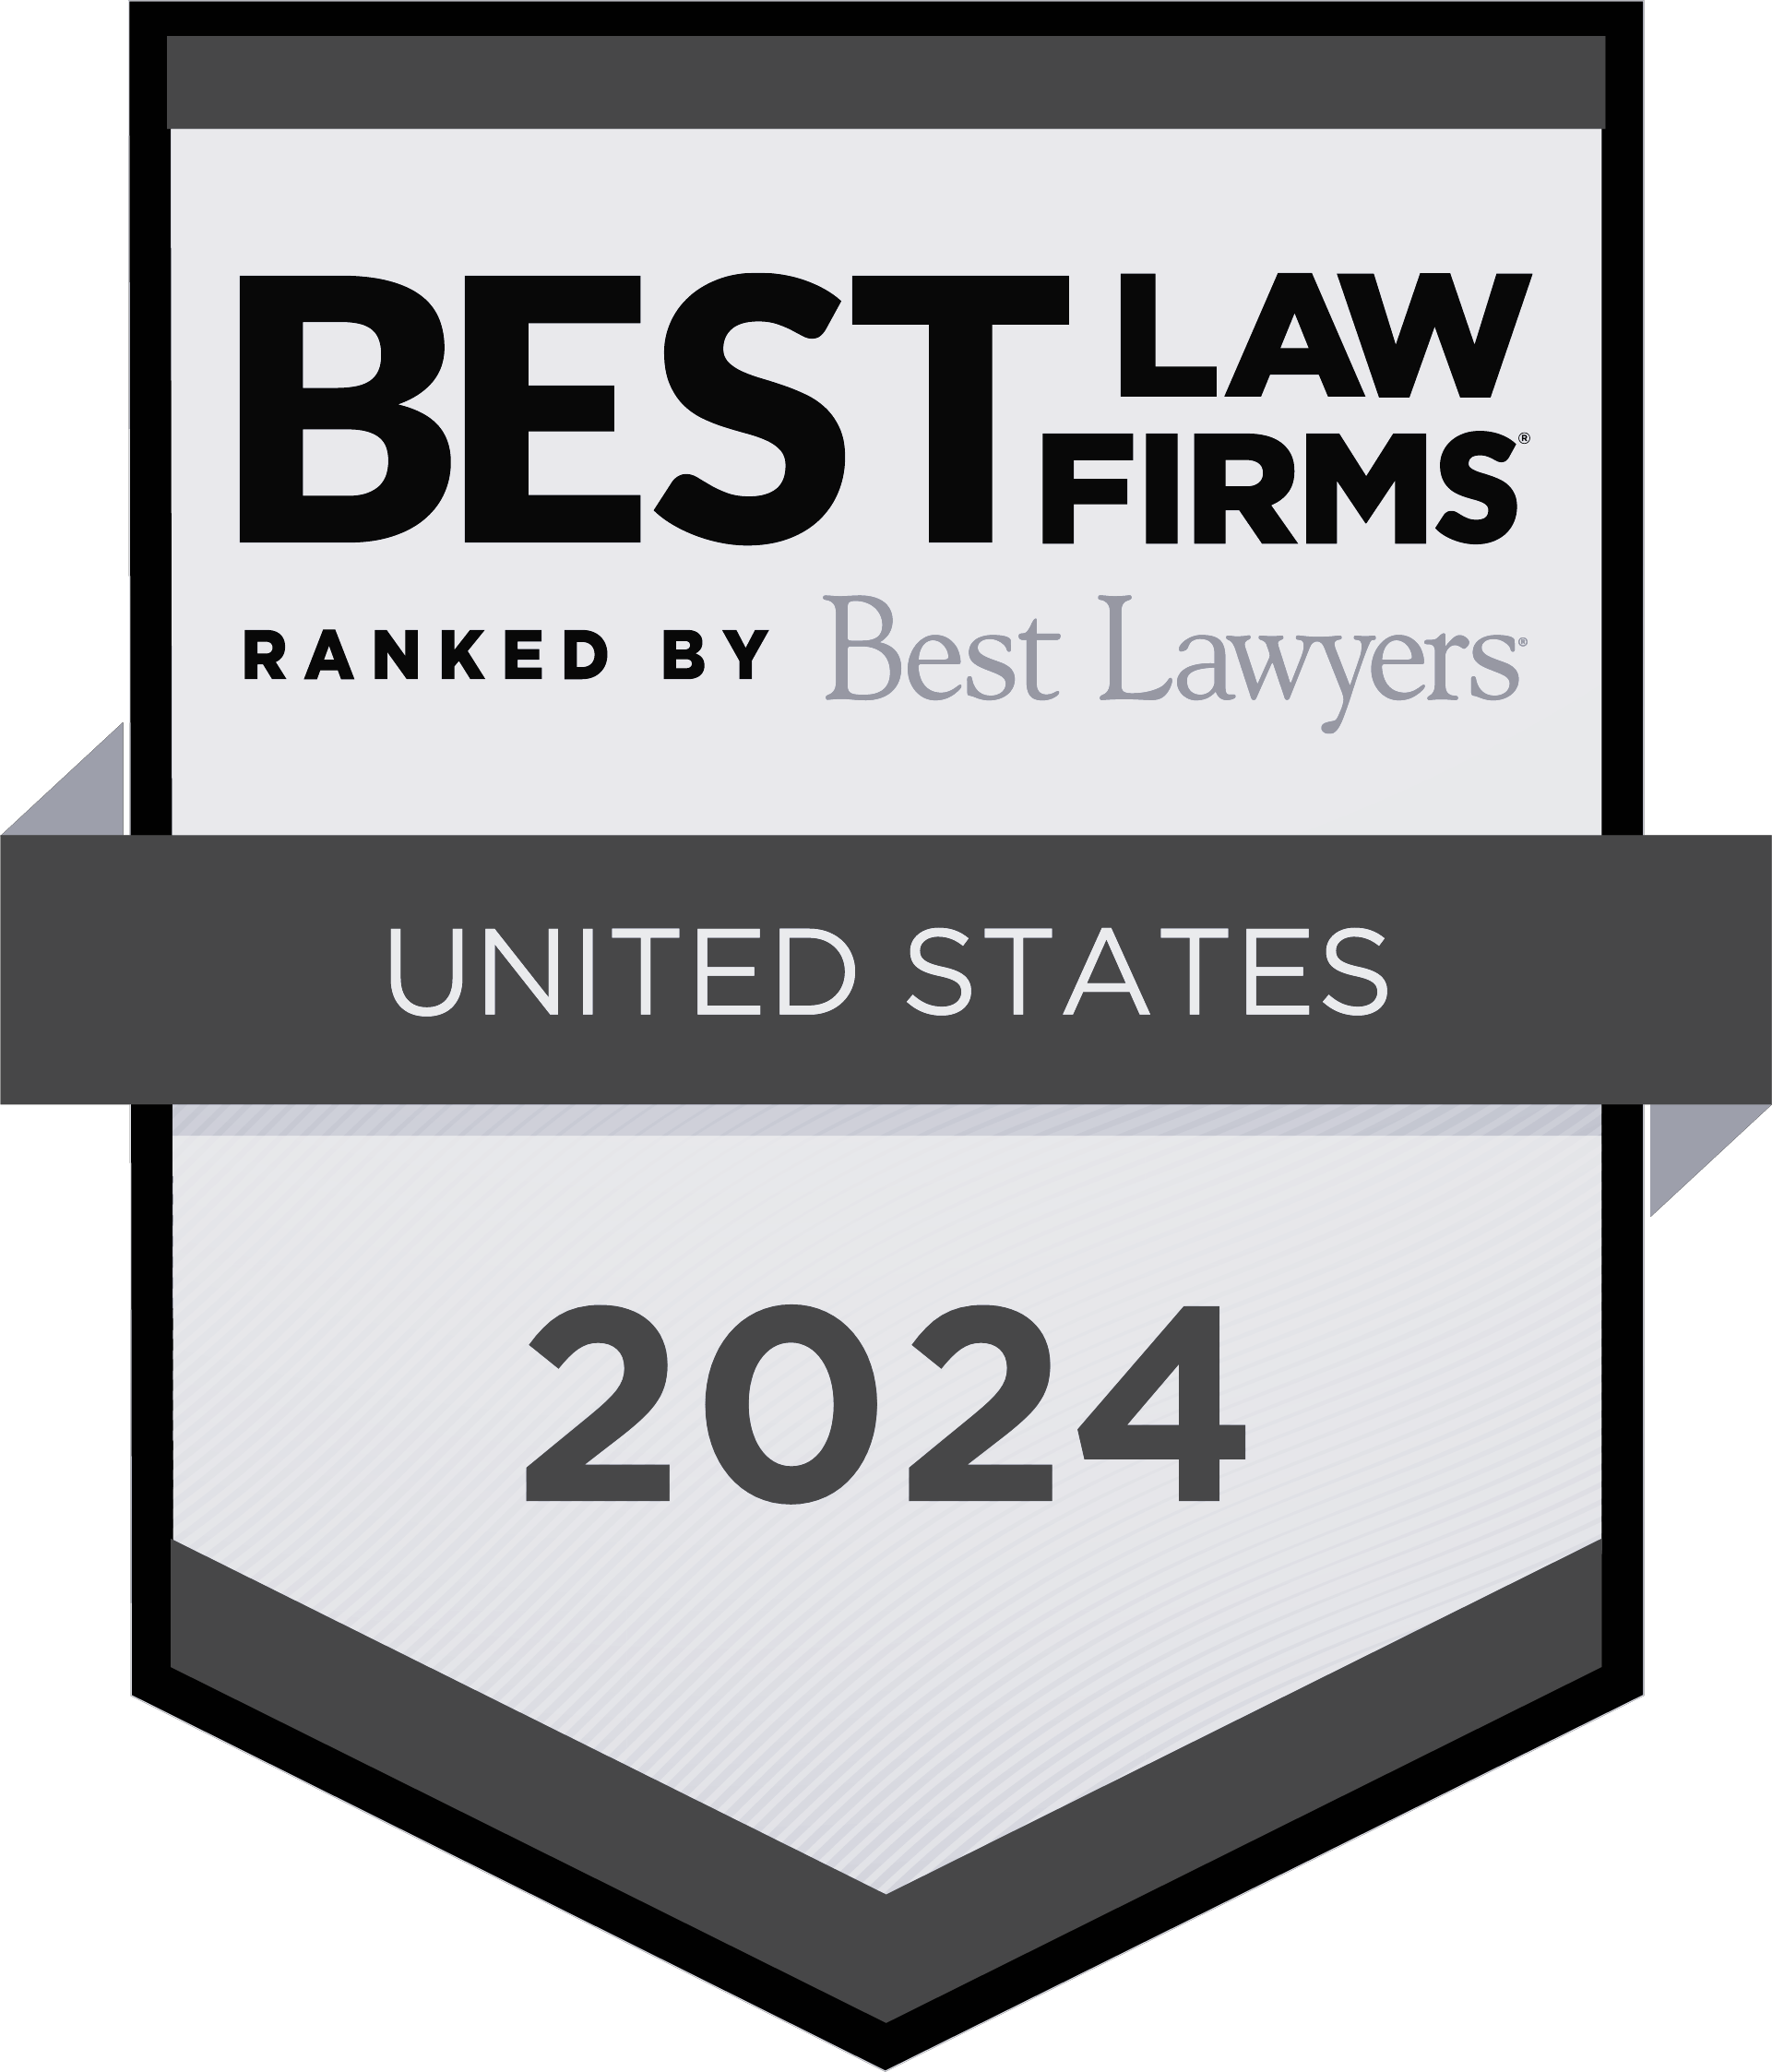 Best Law Firms Standard Badge Bw